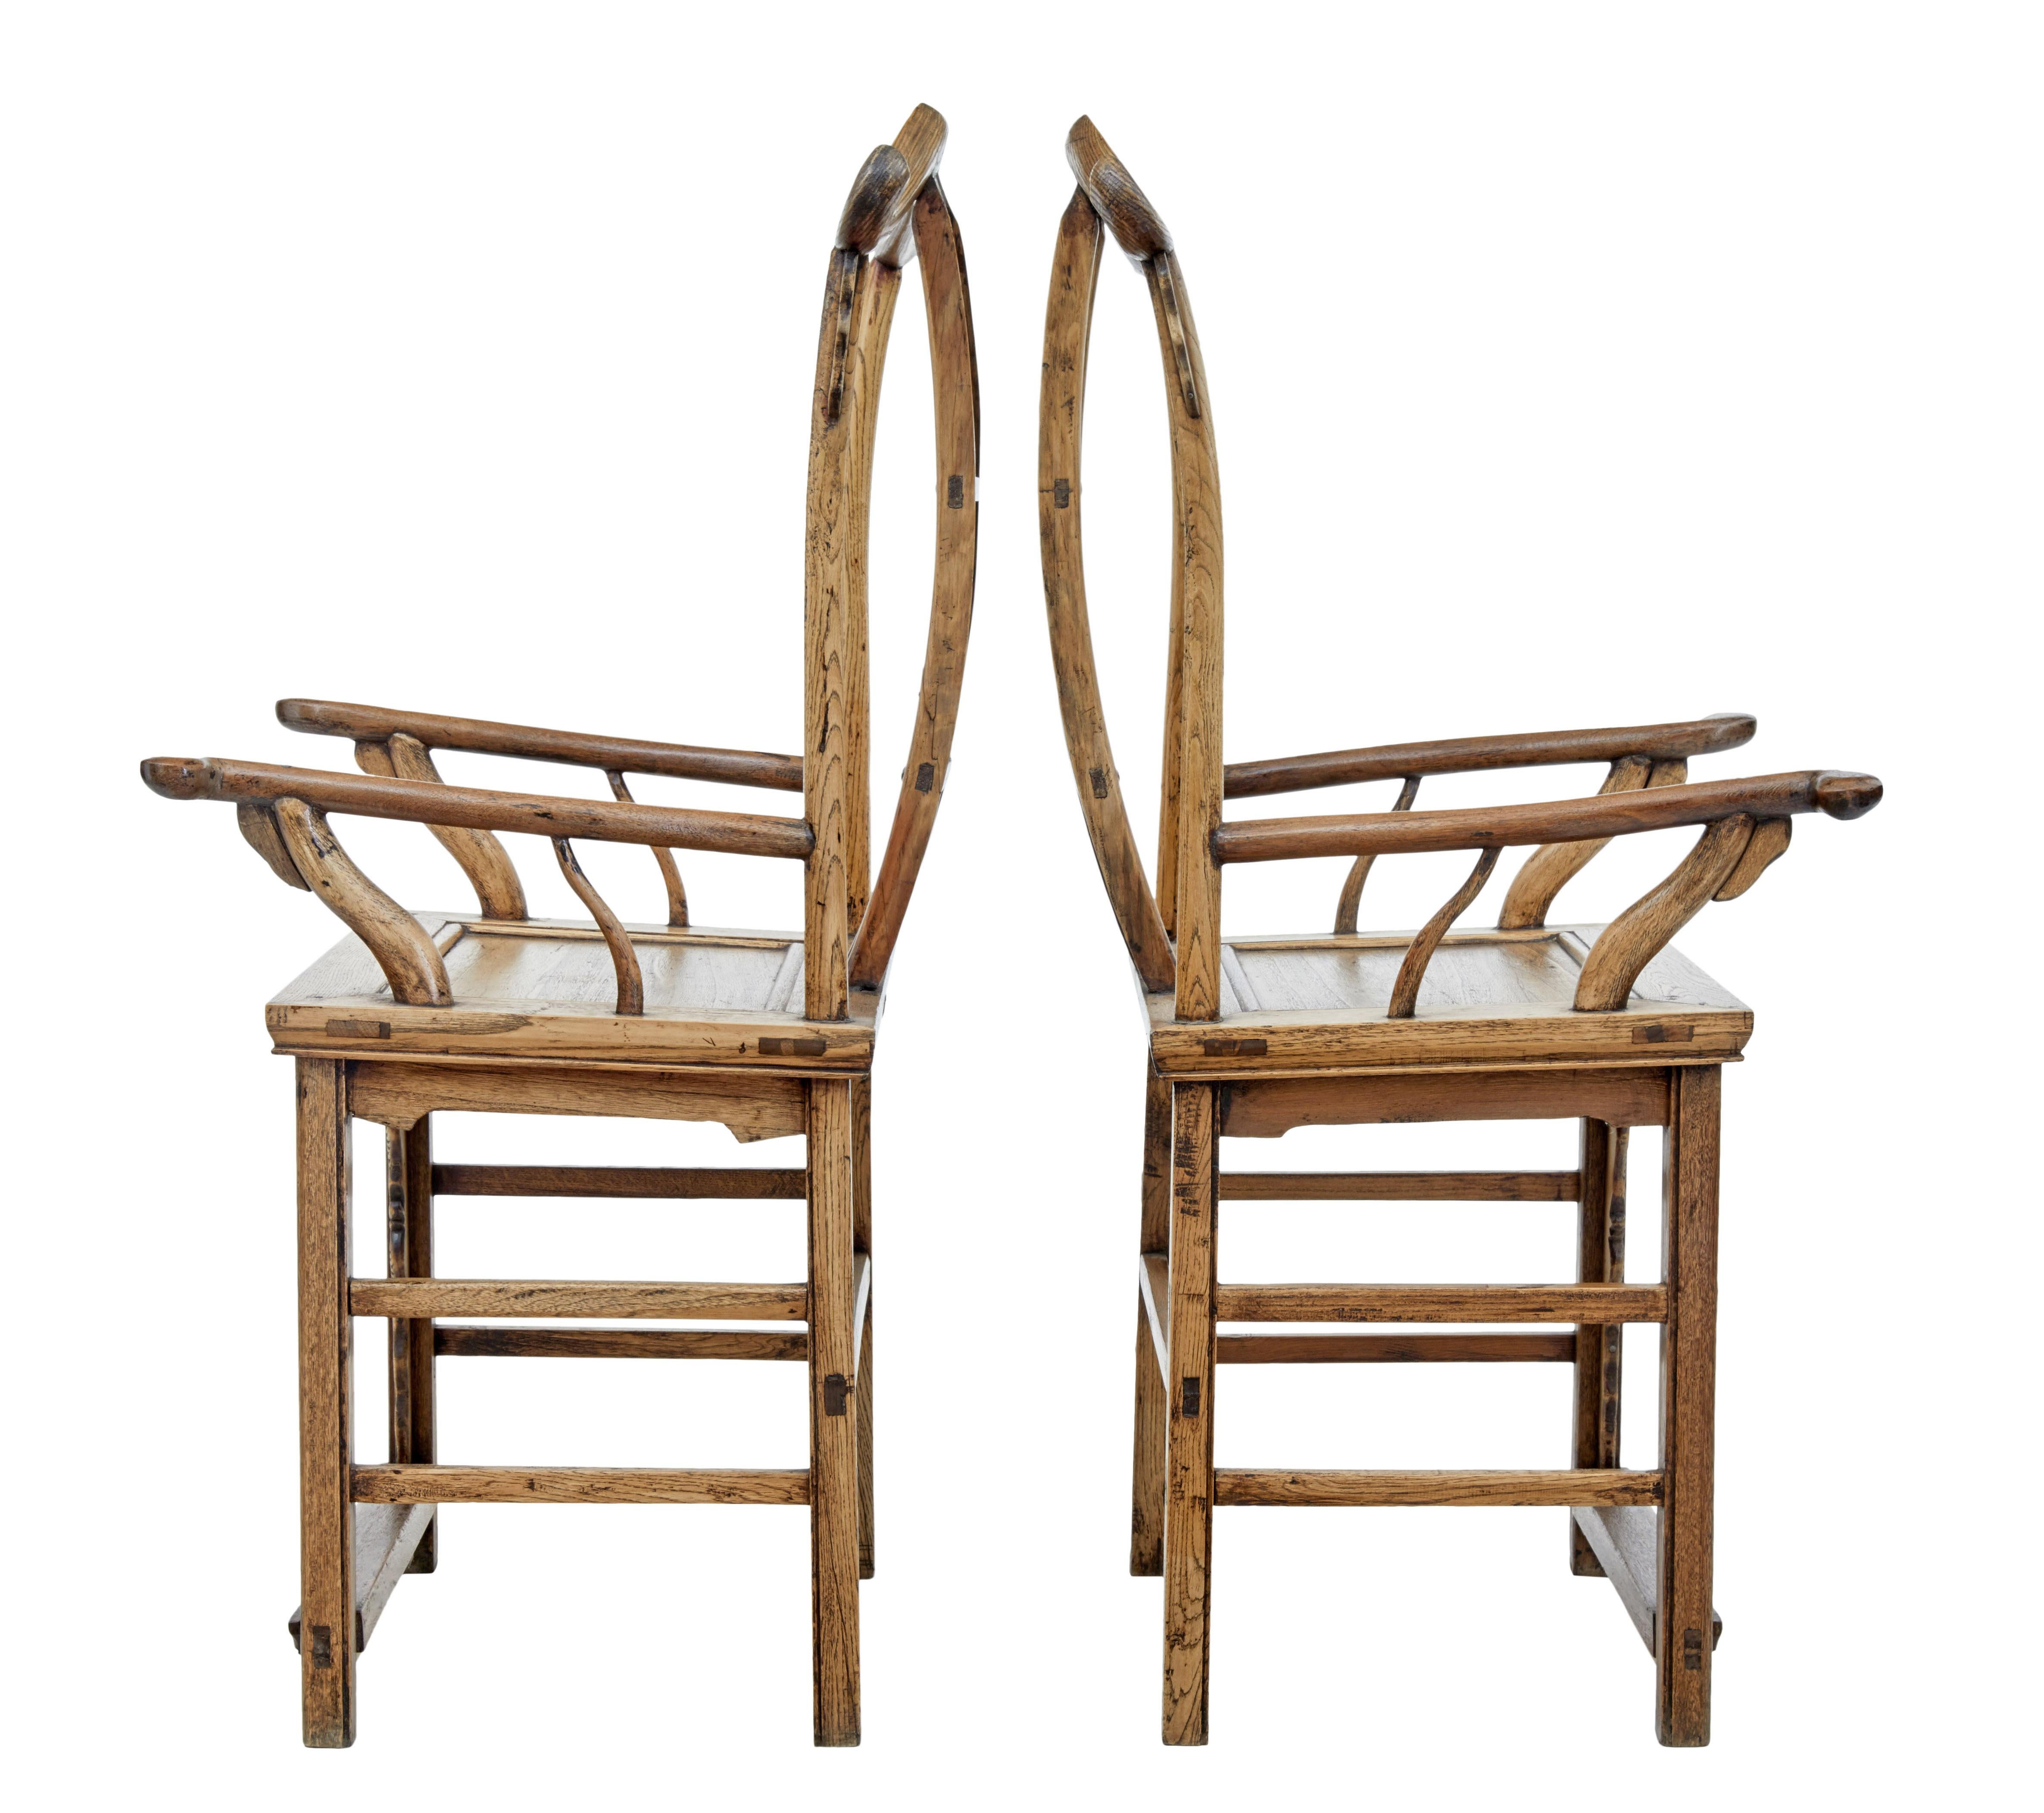 Good quality pair of Chinese yoke back armchairs, circa 1860.

These chairs would have been originally lacquered and have since been stripped.

Carved back panel showing a crane, deer and a bat.

Shaped arms and back rests.

Minor age splits